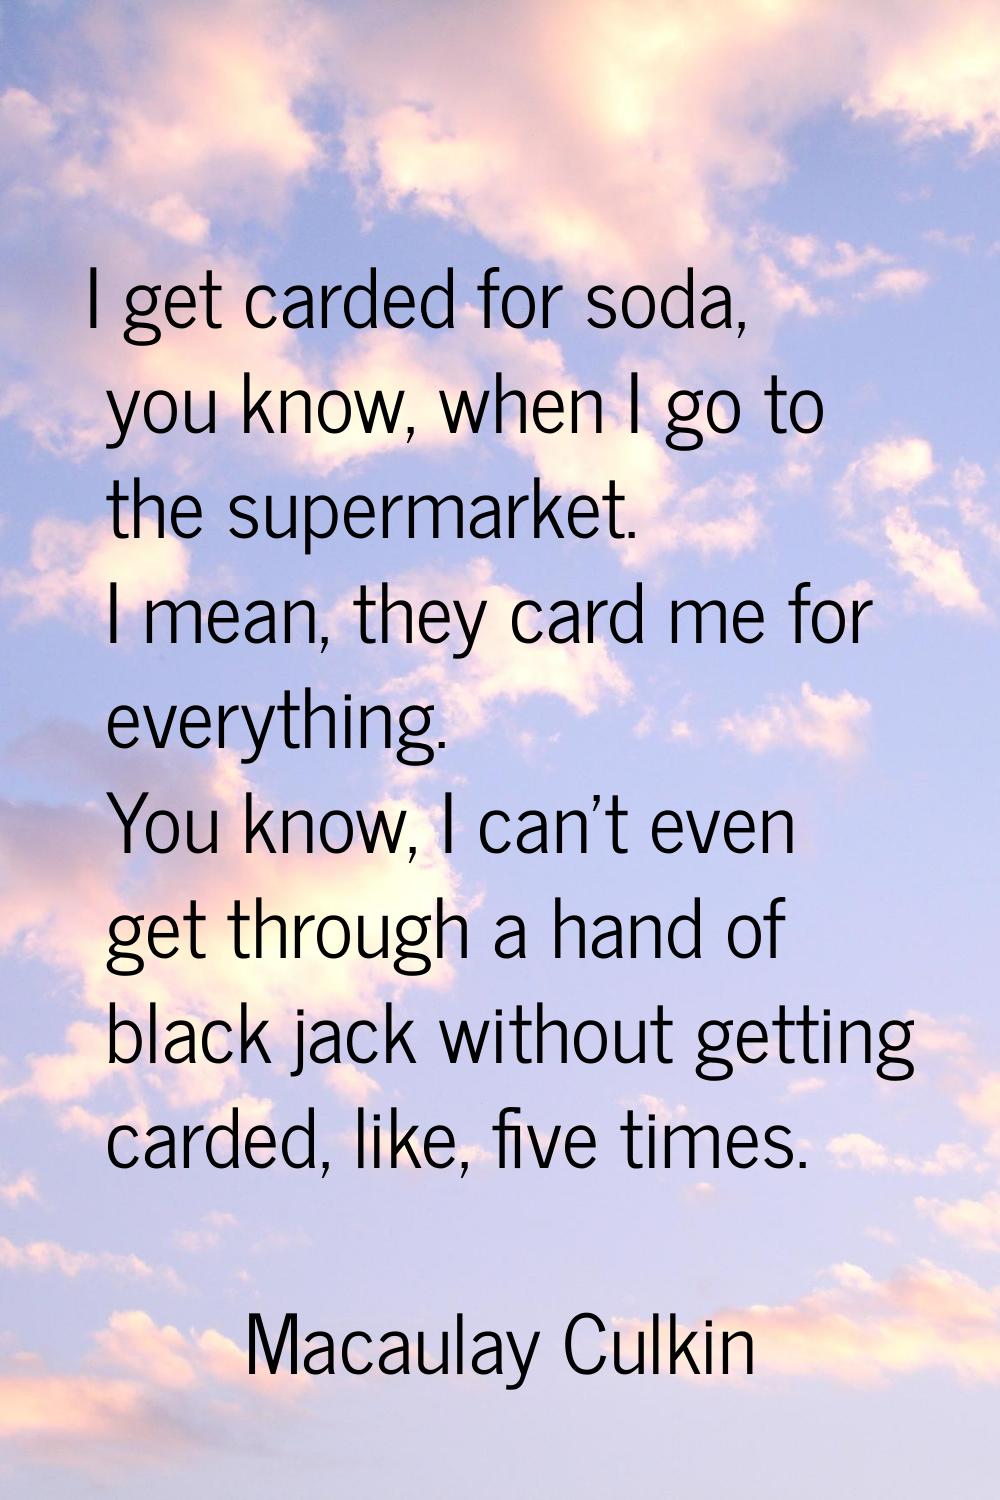 I get carded for soda, you know, when I go to the supermarket. I mean, they card me for everything.